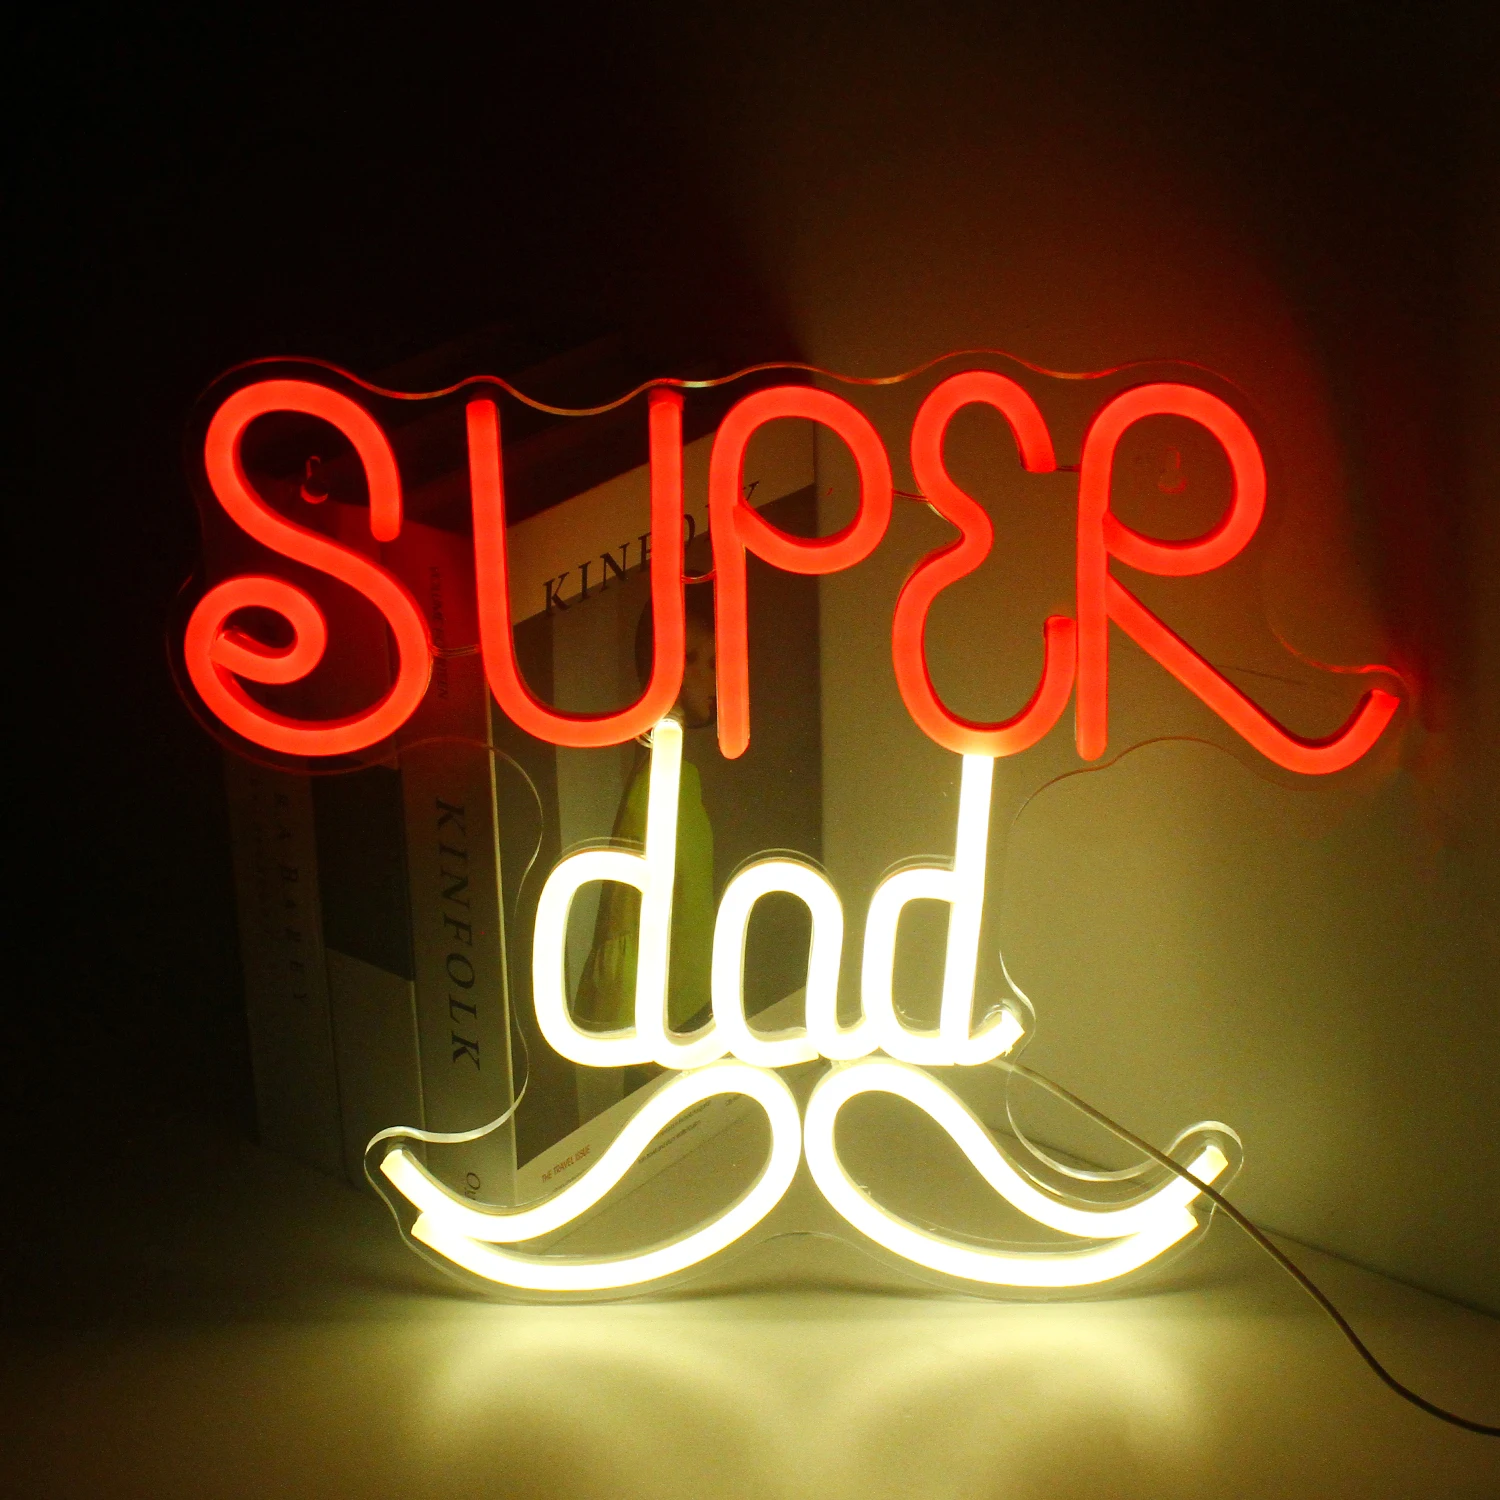 Wanxing Neon Sign Acrylic Super Dad Custom LED Light Ins Home Wall Bar Party Club Shop Aesthetic Room Bedroom Decor Child Gift toy traffic toys for kids sound light mini cones sign models plastic signs signal plaything child